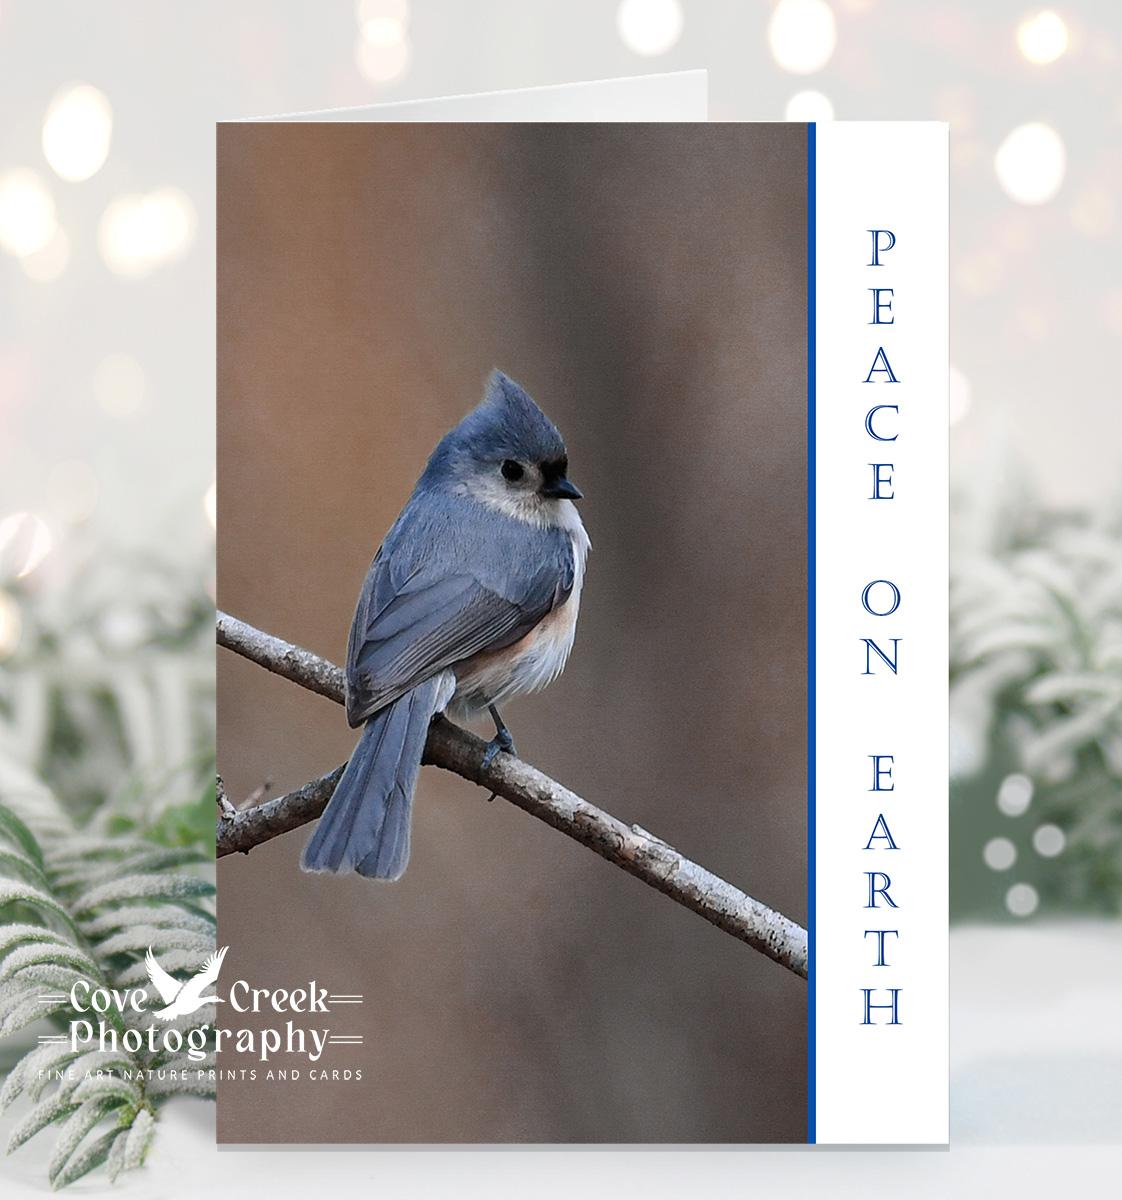 A handmade nature photography Christmas card by photographer T. Spratt and available at Cove Creek Photography.